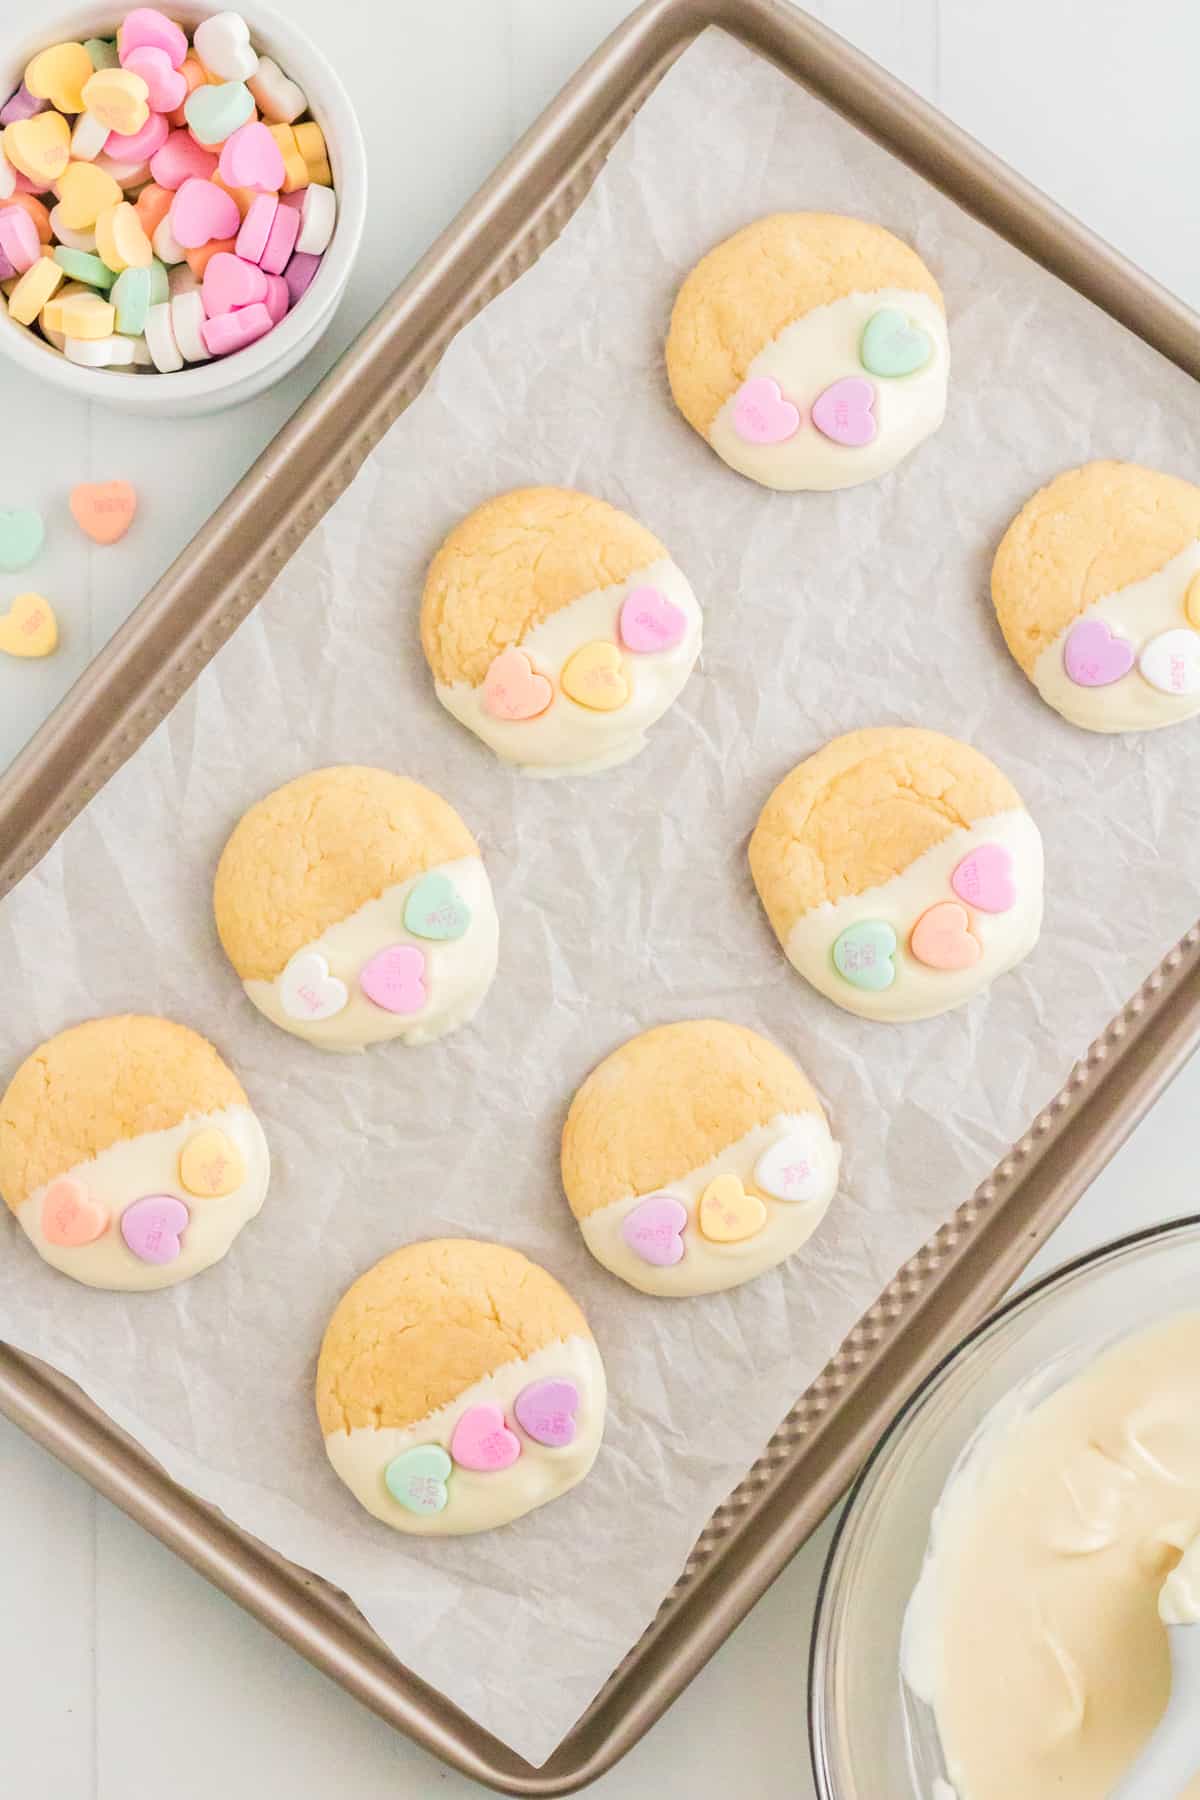 Dipped Valentines Day Conversation Heart Cookies on lined cookie sheet